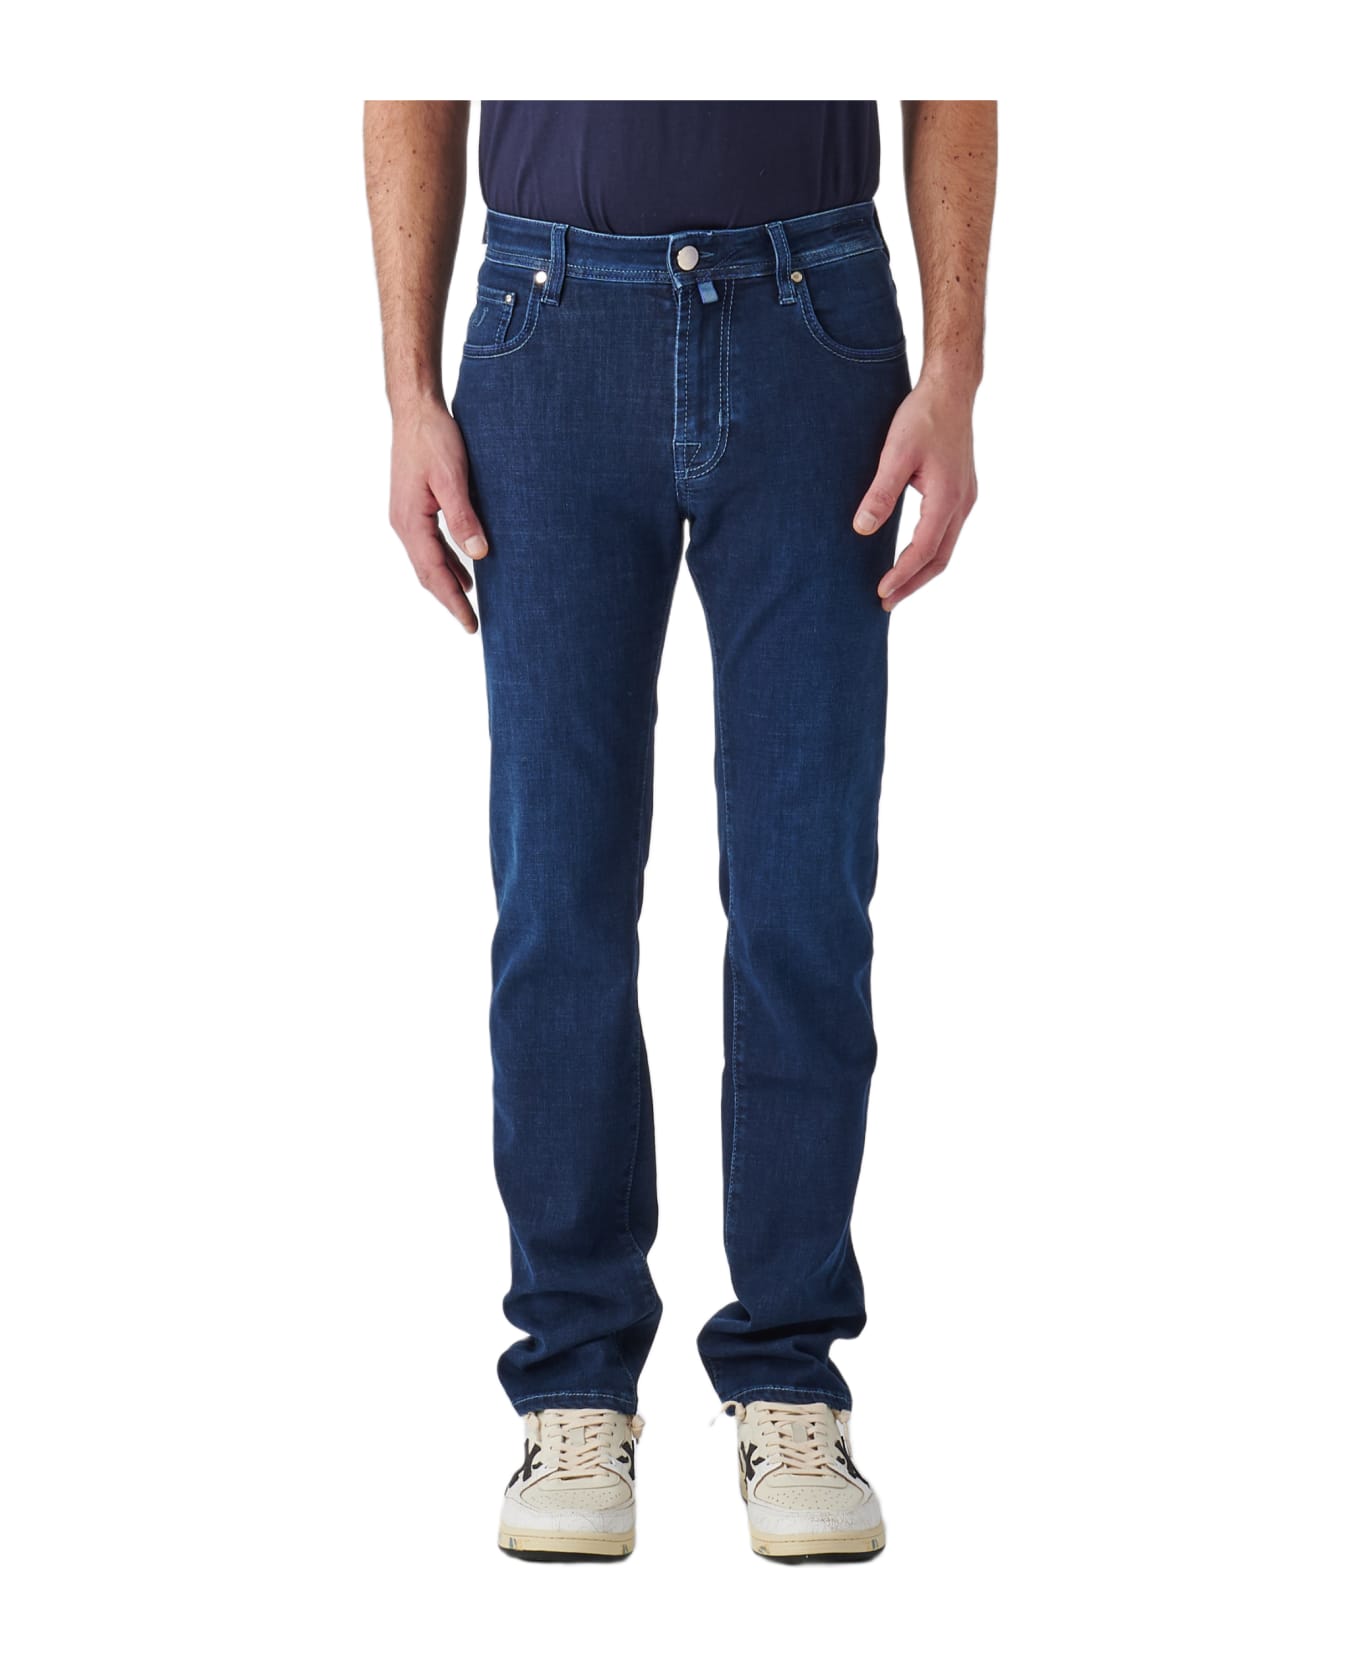 Jacob Cohen Pantalone Slim Fit With Zip Bard Trousers - DENIM SCURO ボトムス